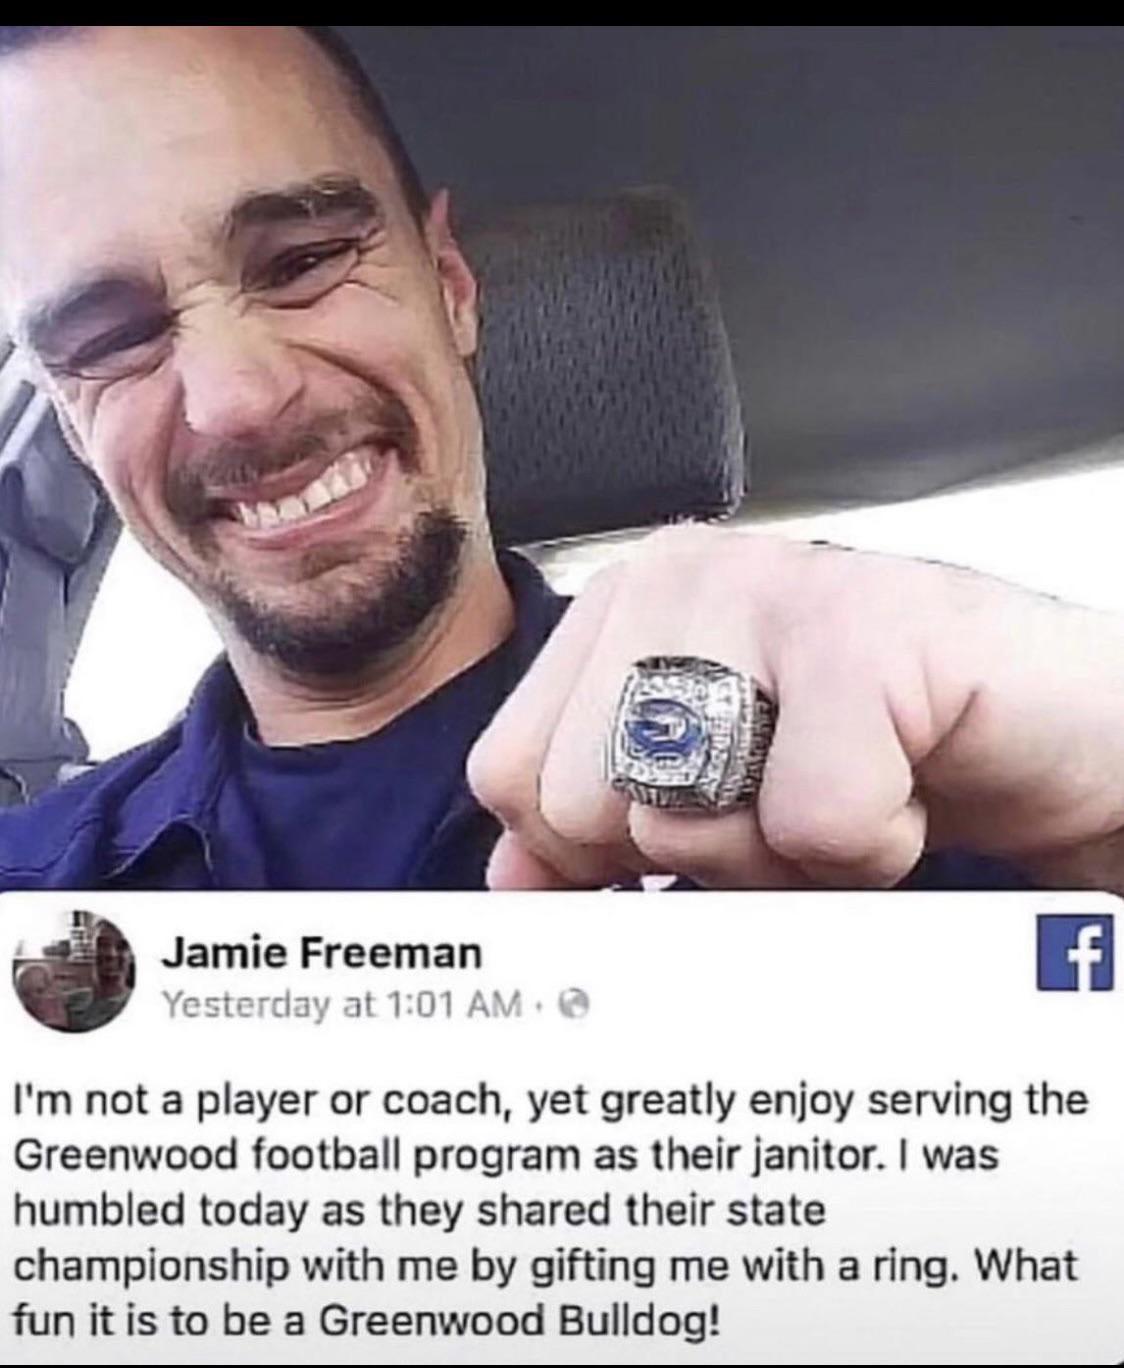 Even the Janitor got a ring!